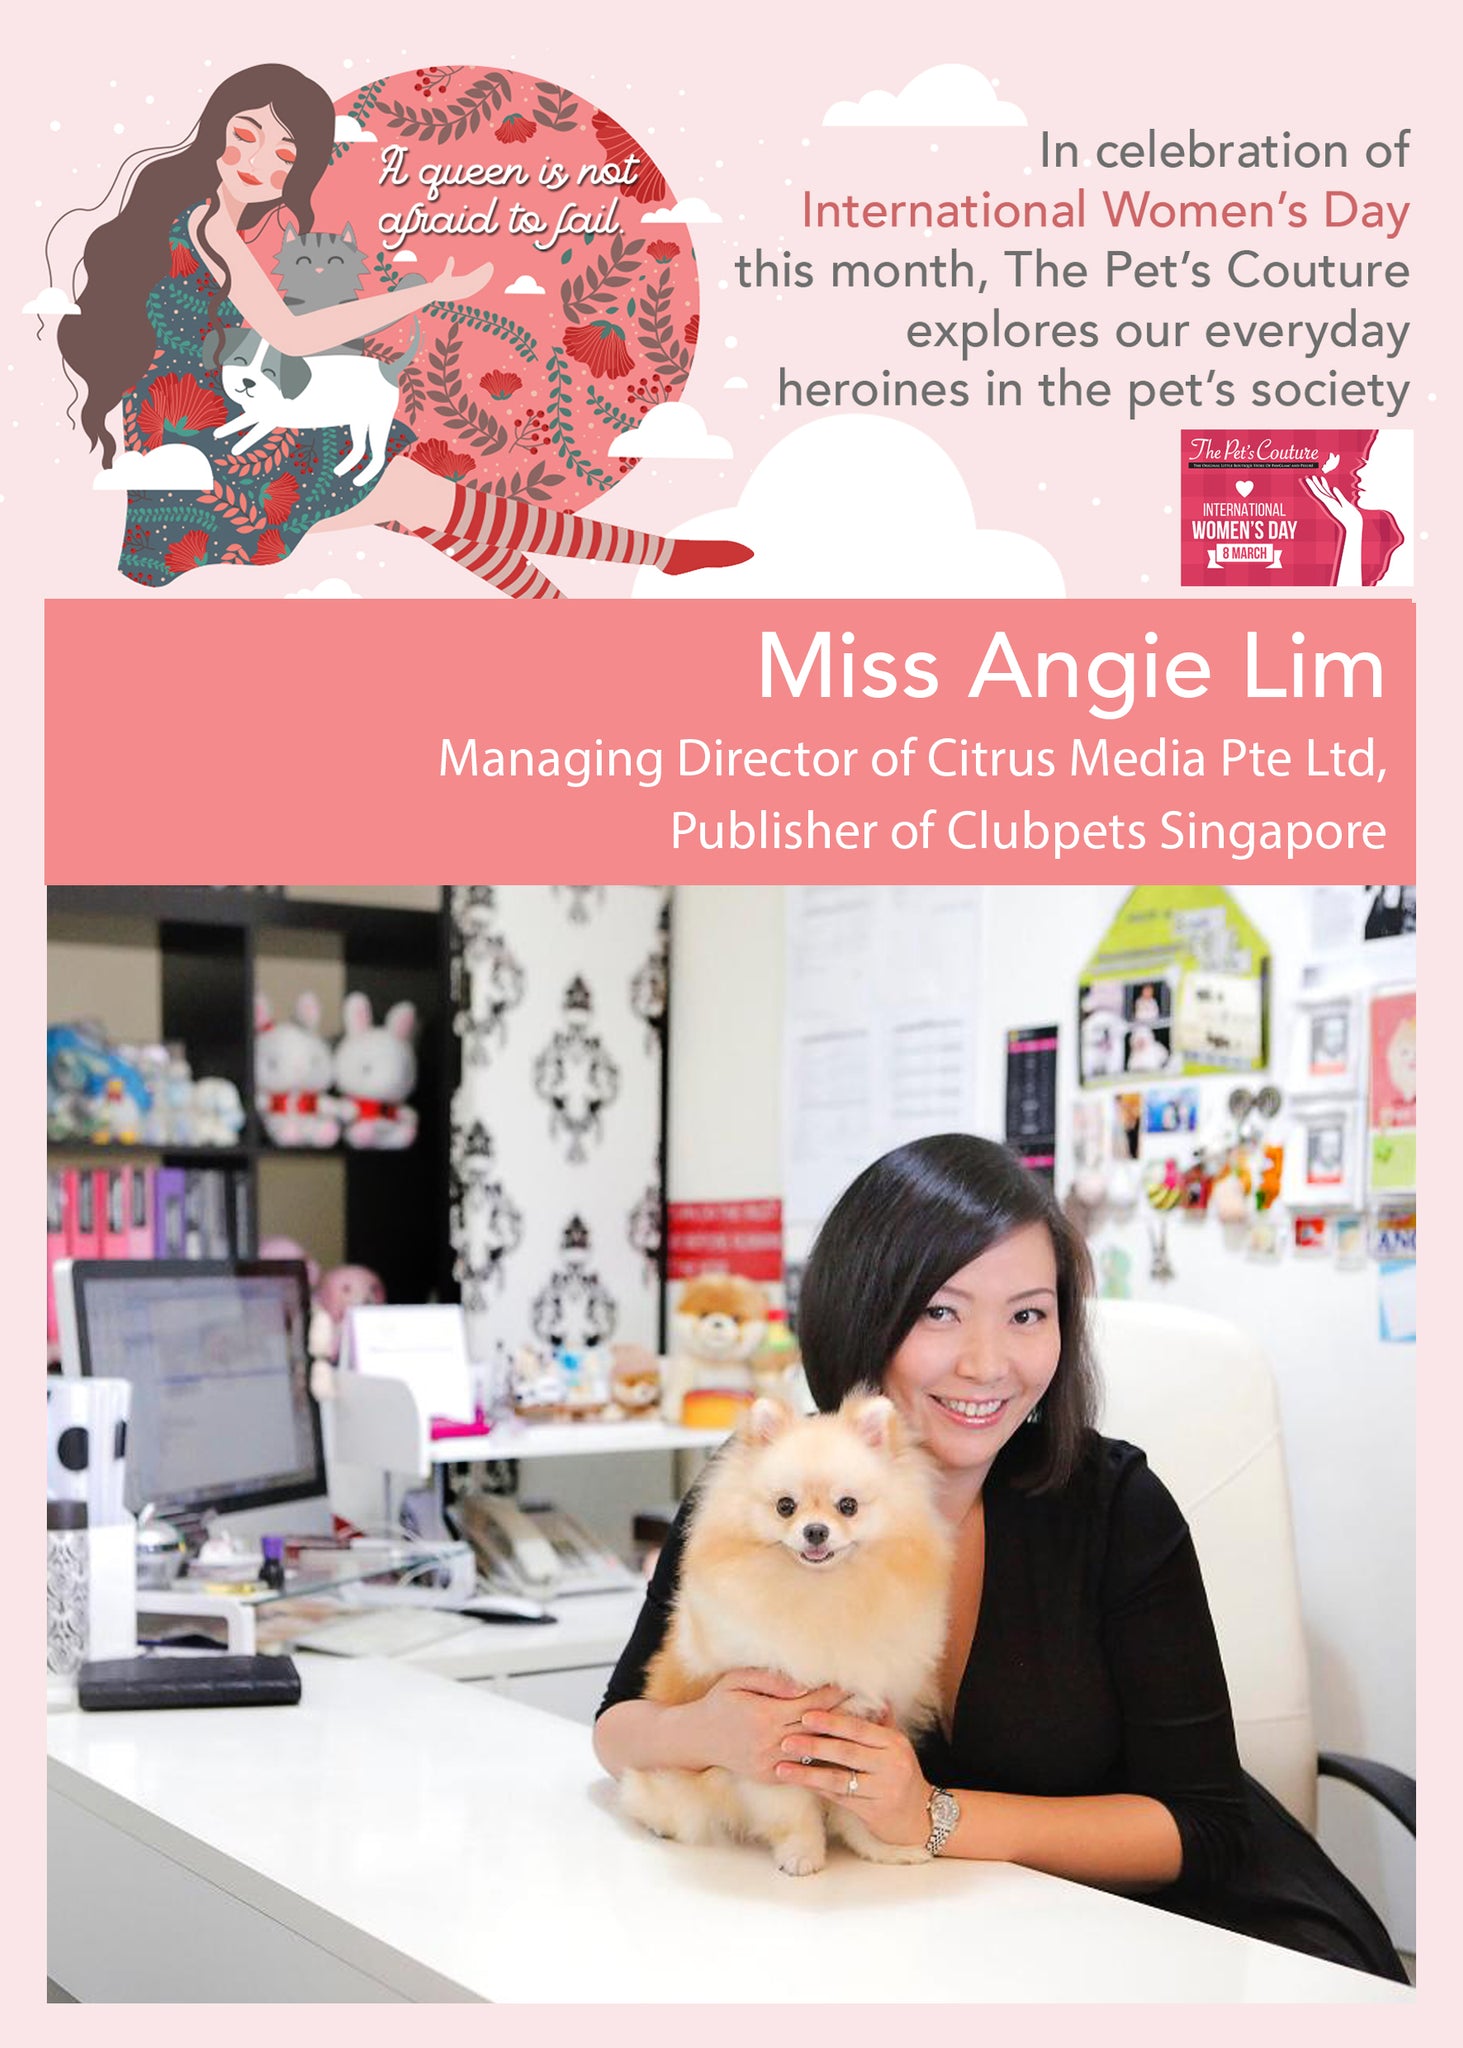 Angie Lim - Heroine of the Week (An International Women's Day March Feature)